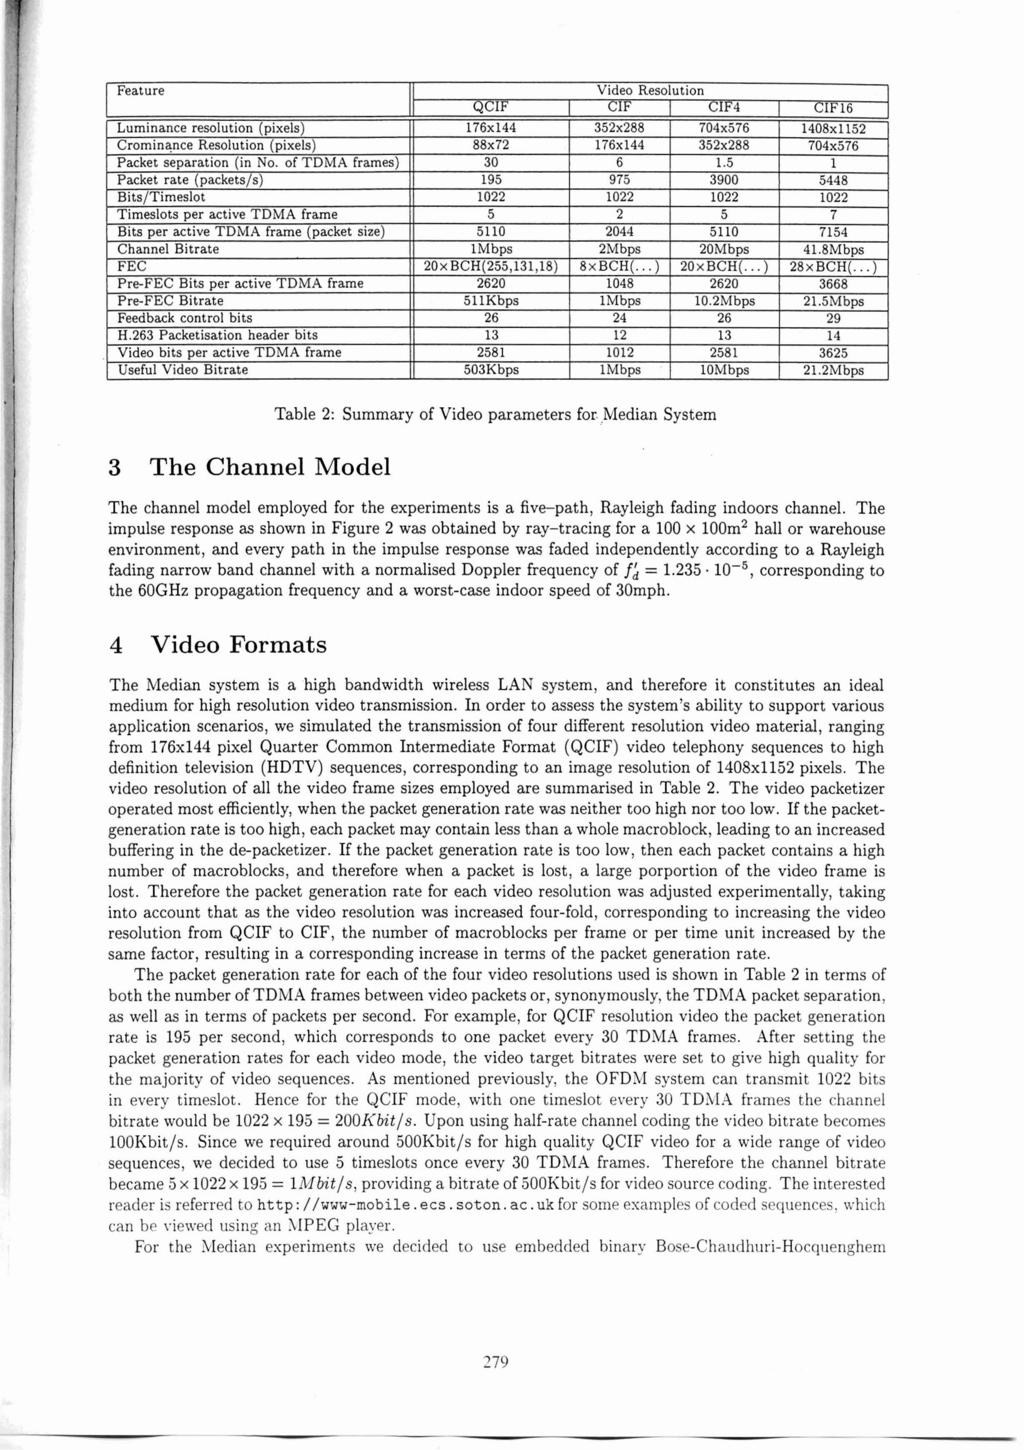 3 The Channel Model Table 2: Summary of Video parameters for.,median System The channel model employed for the experiments is a five-path, Rayleigh fading indoors channel.